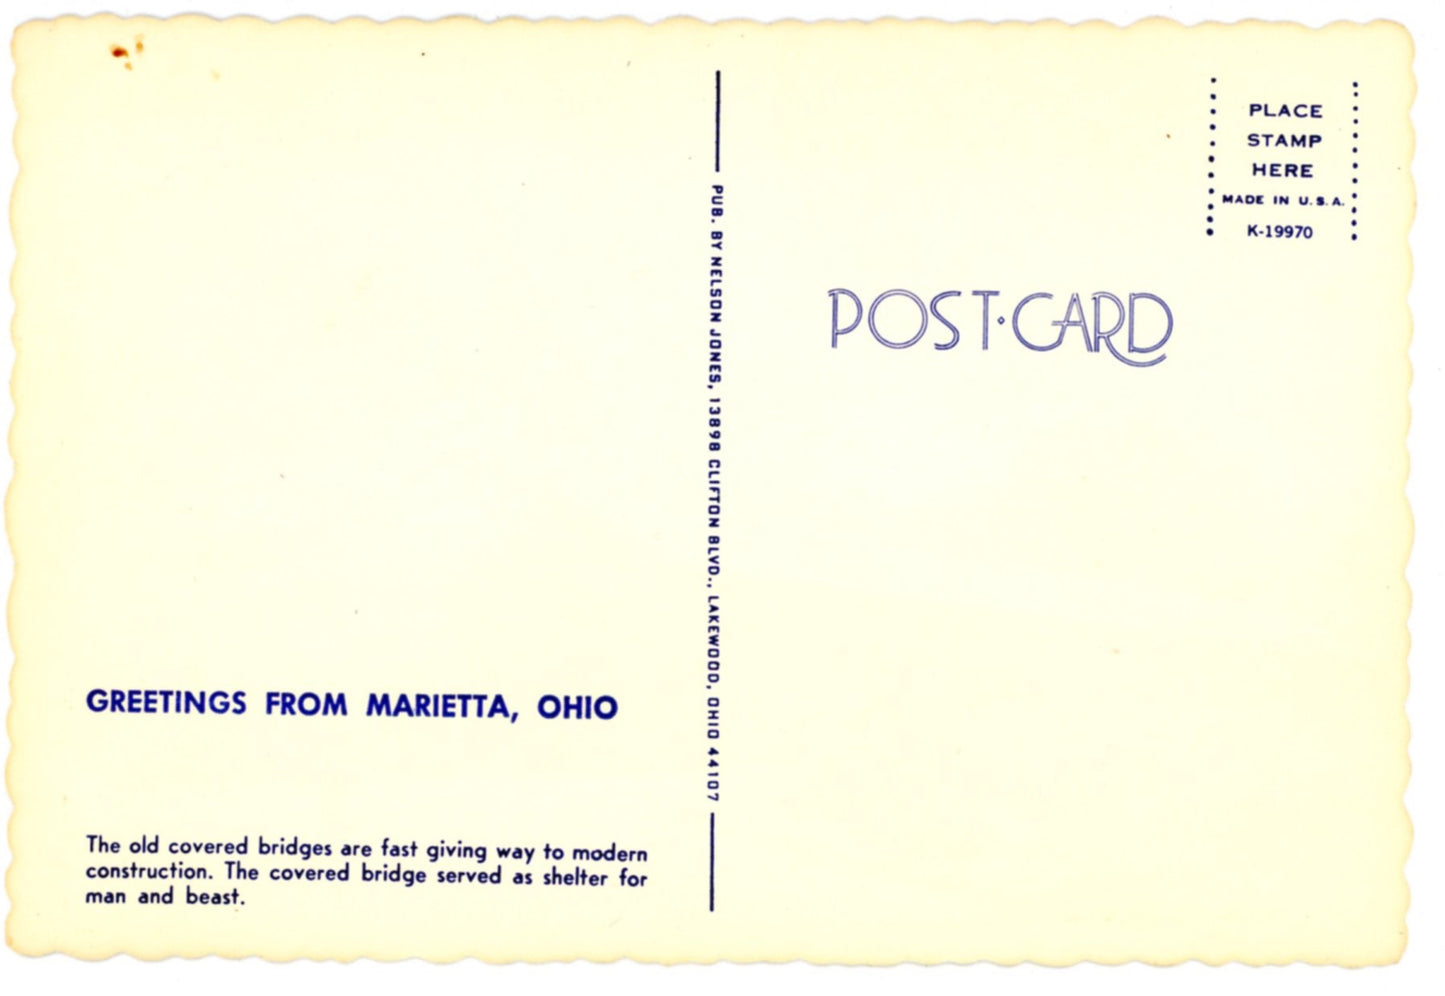 Old Ohio Covered Bridge #3 "Greetings from MARIETTA OHIO" Collection Large Vintage Postcard 4" x 6"